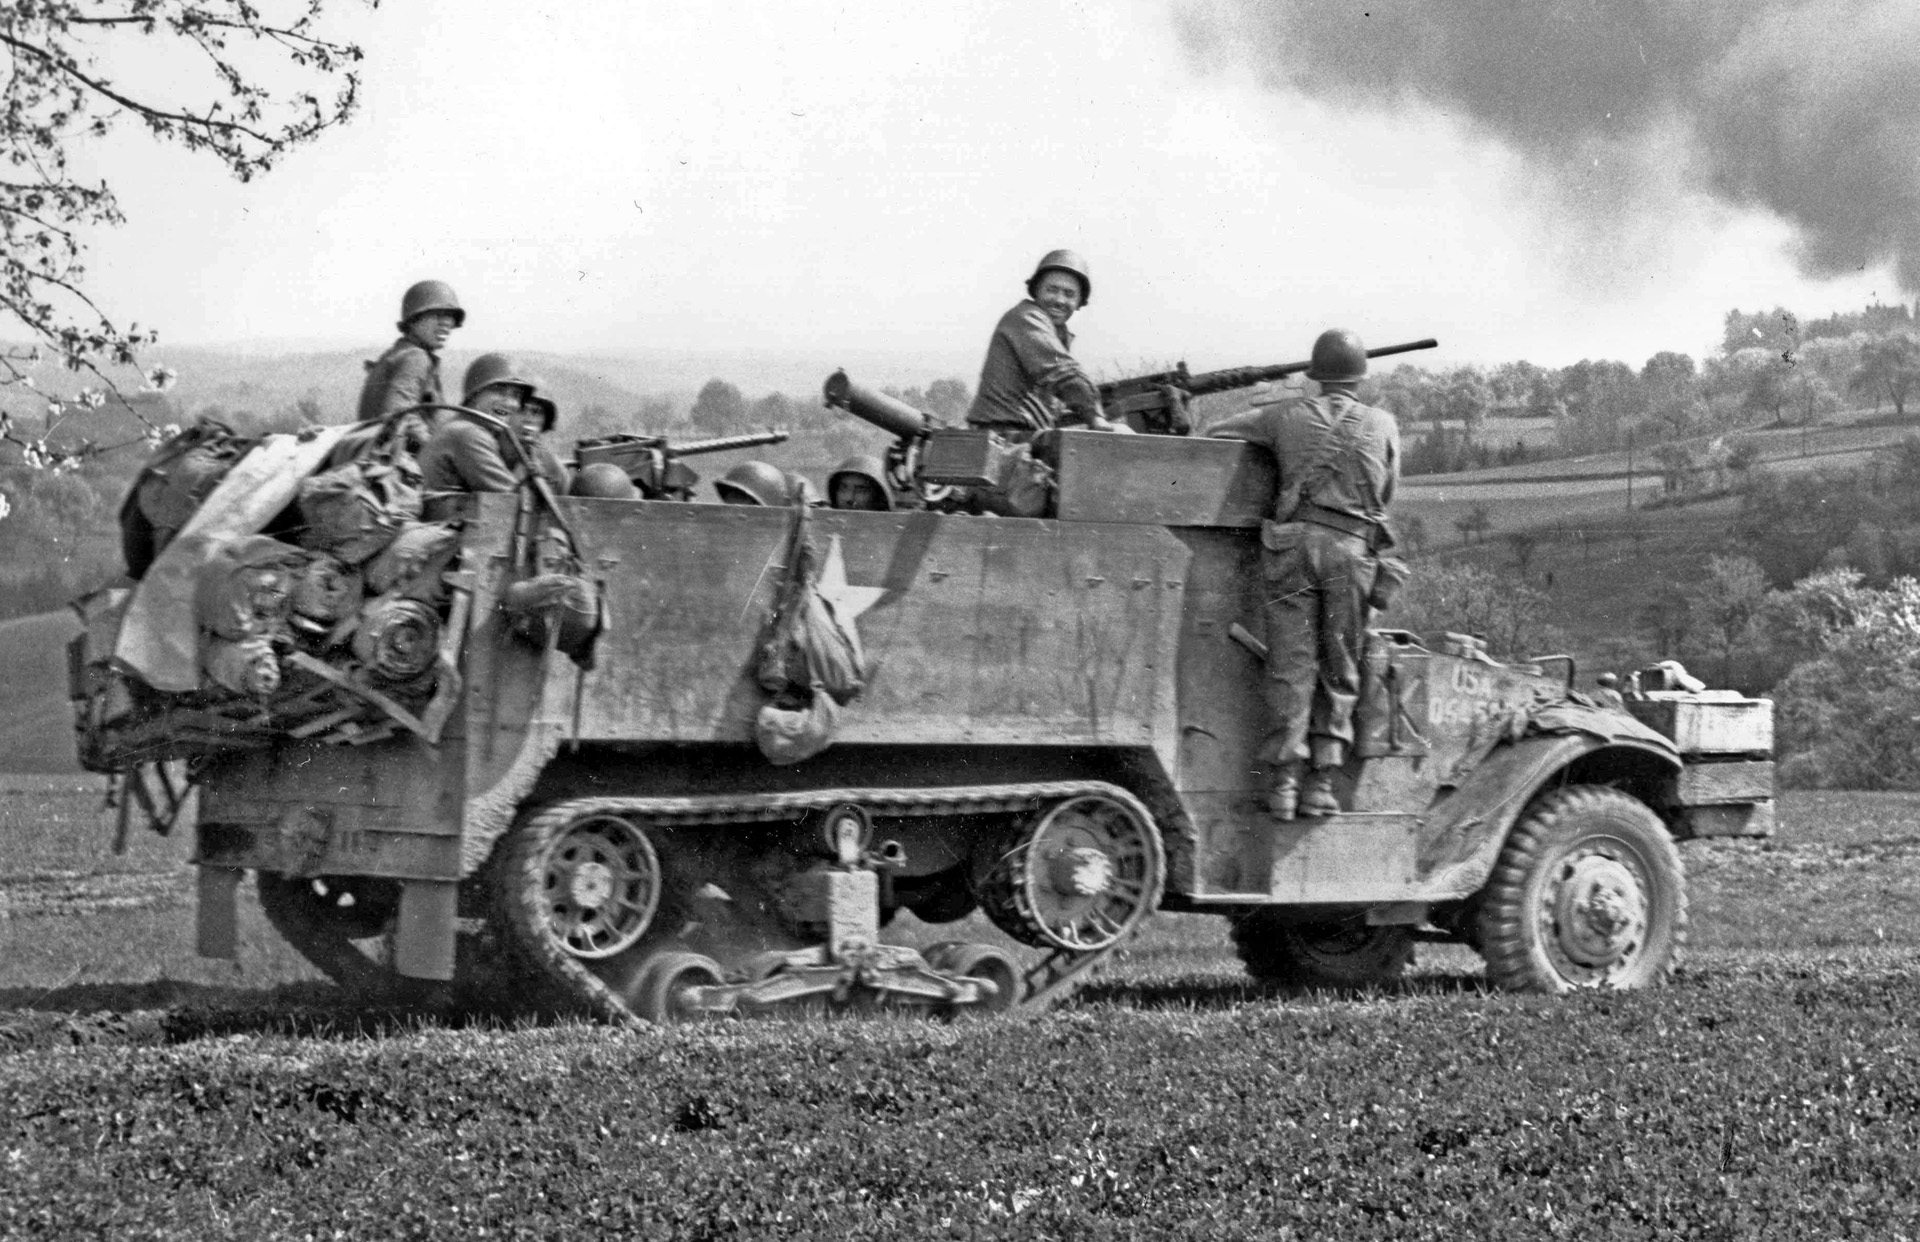 Working in tandem with the tanks, an M3 halftrack of the 61st Armored Infantry Battalion packed with soldiers and their weapons rolls toward Geisselhardt, April 1945. The war would be over in less than a month.